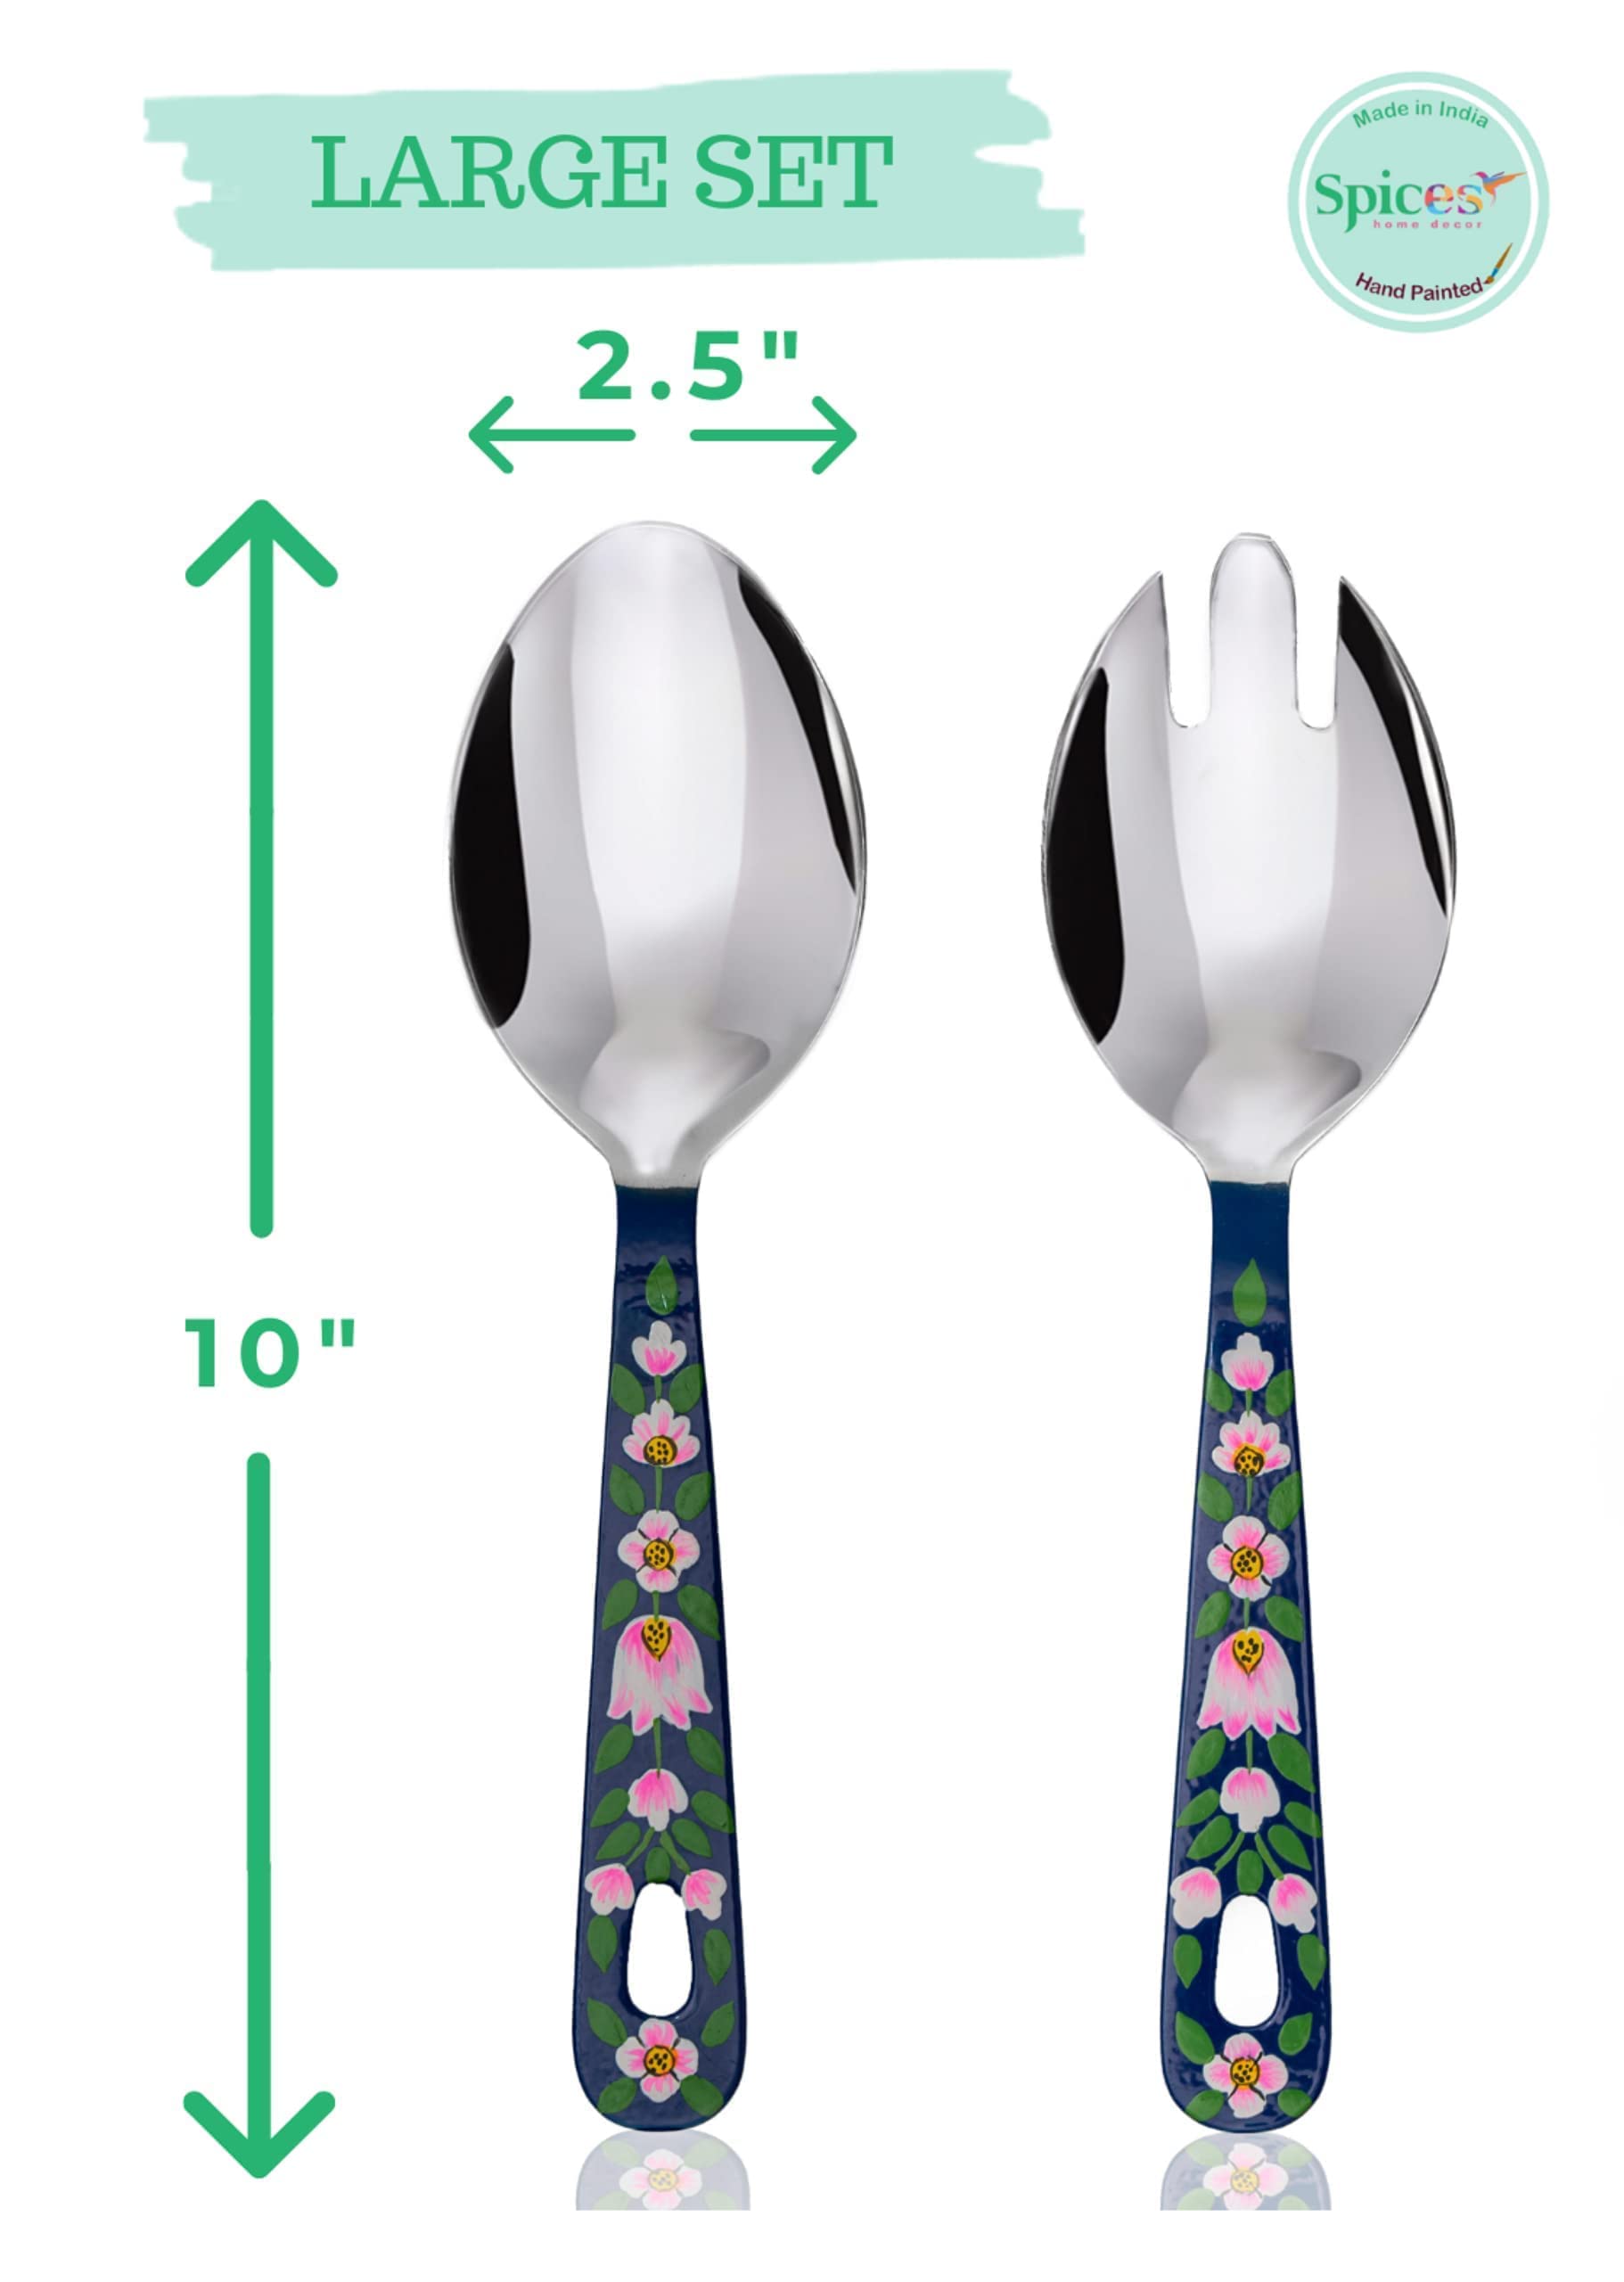 Hand Painted Serving Spoon and Fork – Large Stainless Steel Salad Servers. Floral Colorful Kashmiri Art - Practical Decorative and Durable, Set of 2 with 10 Inch Handles in Cotton Bag (Blue)